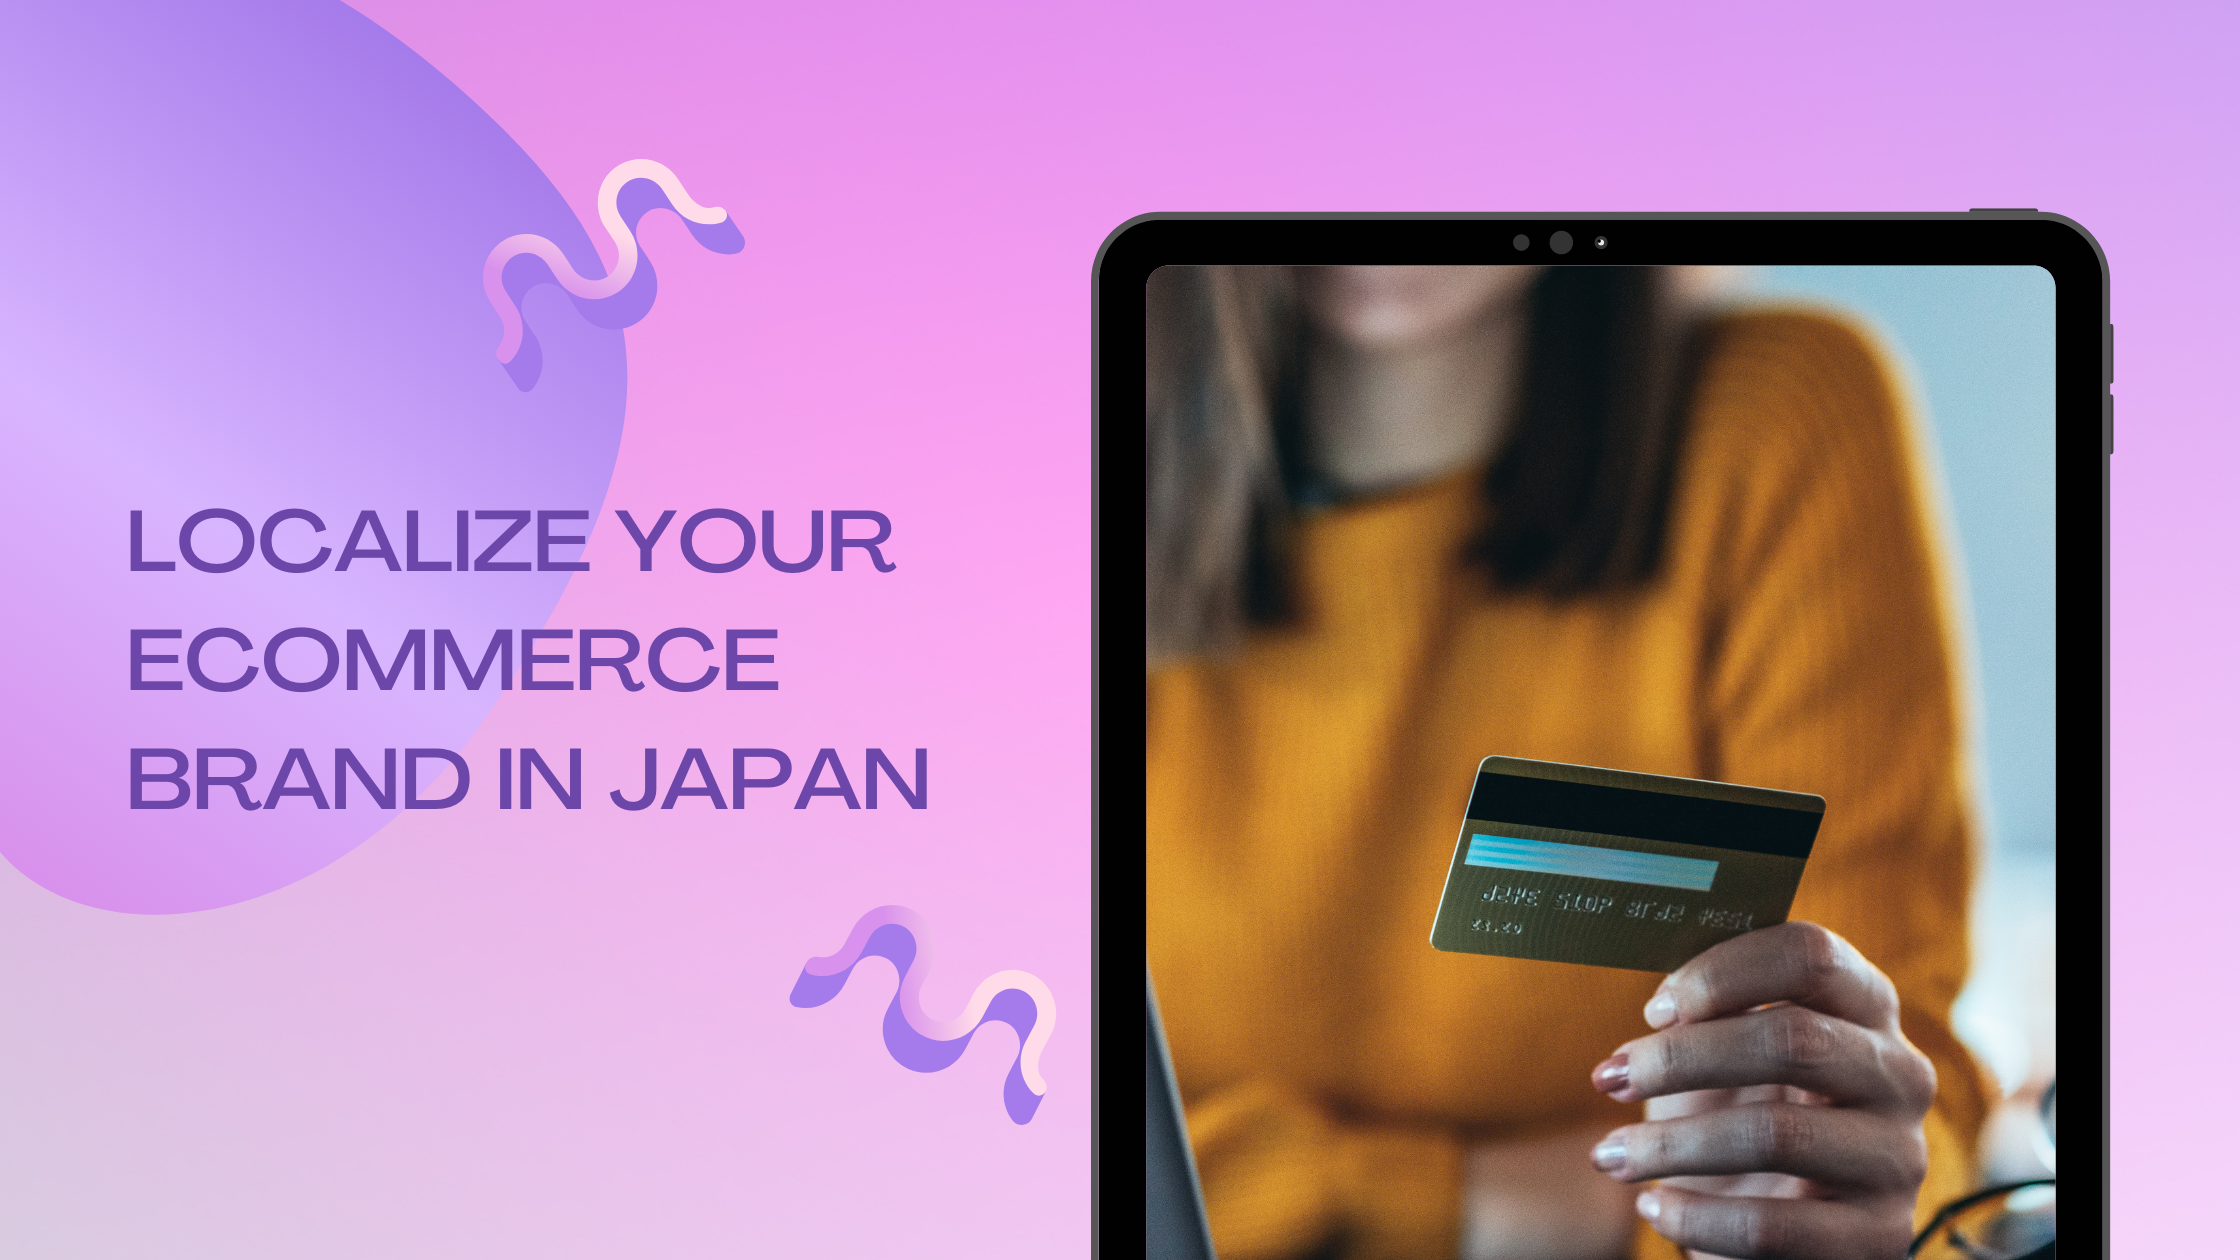 Localize Your Ecommerce Brand in Japan: Payment Methods to Offer As An Ecommerce Business in Japan